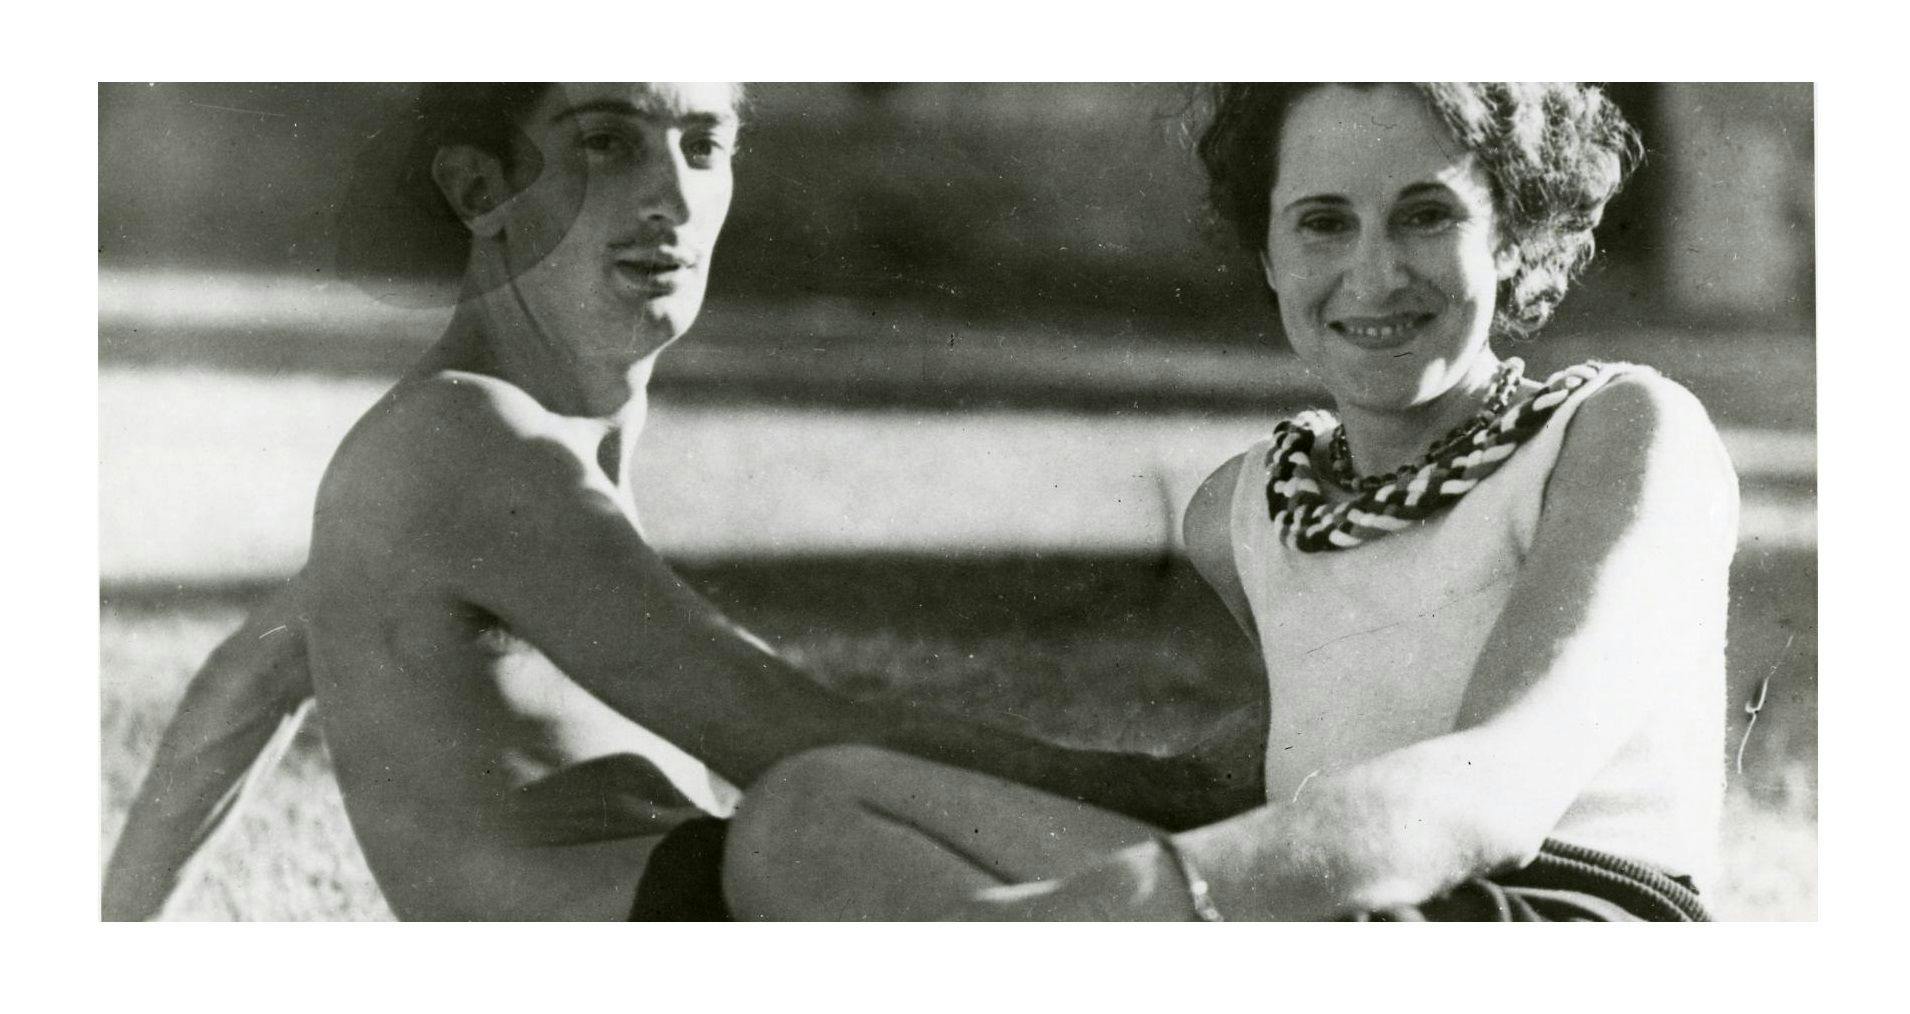 A 26-year old Dali photographed with Gala, his Russian-born wife, in1930.